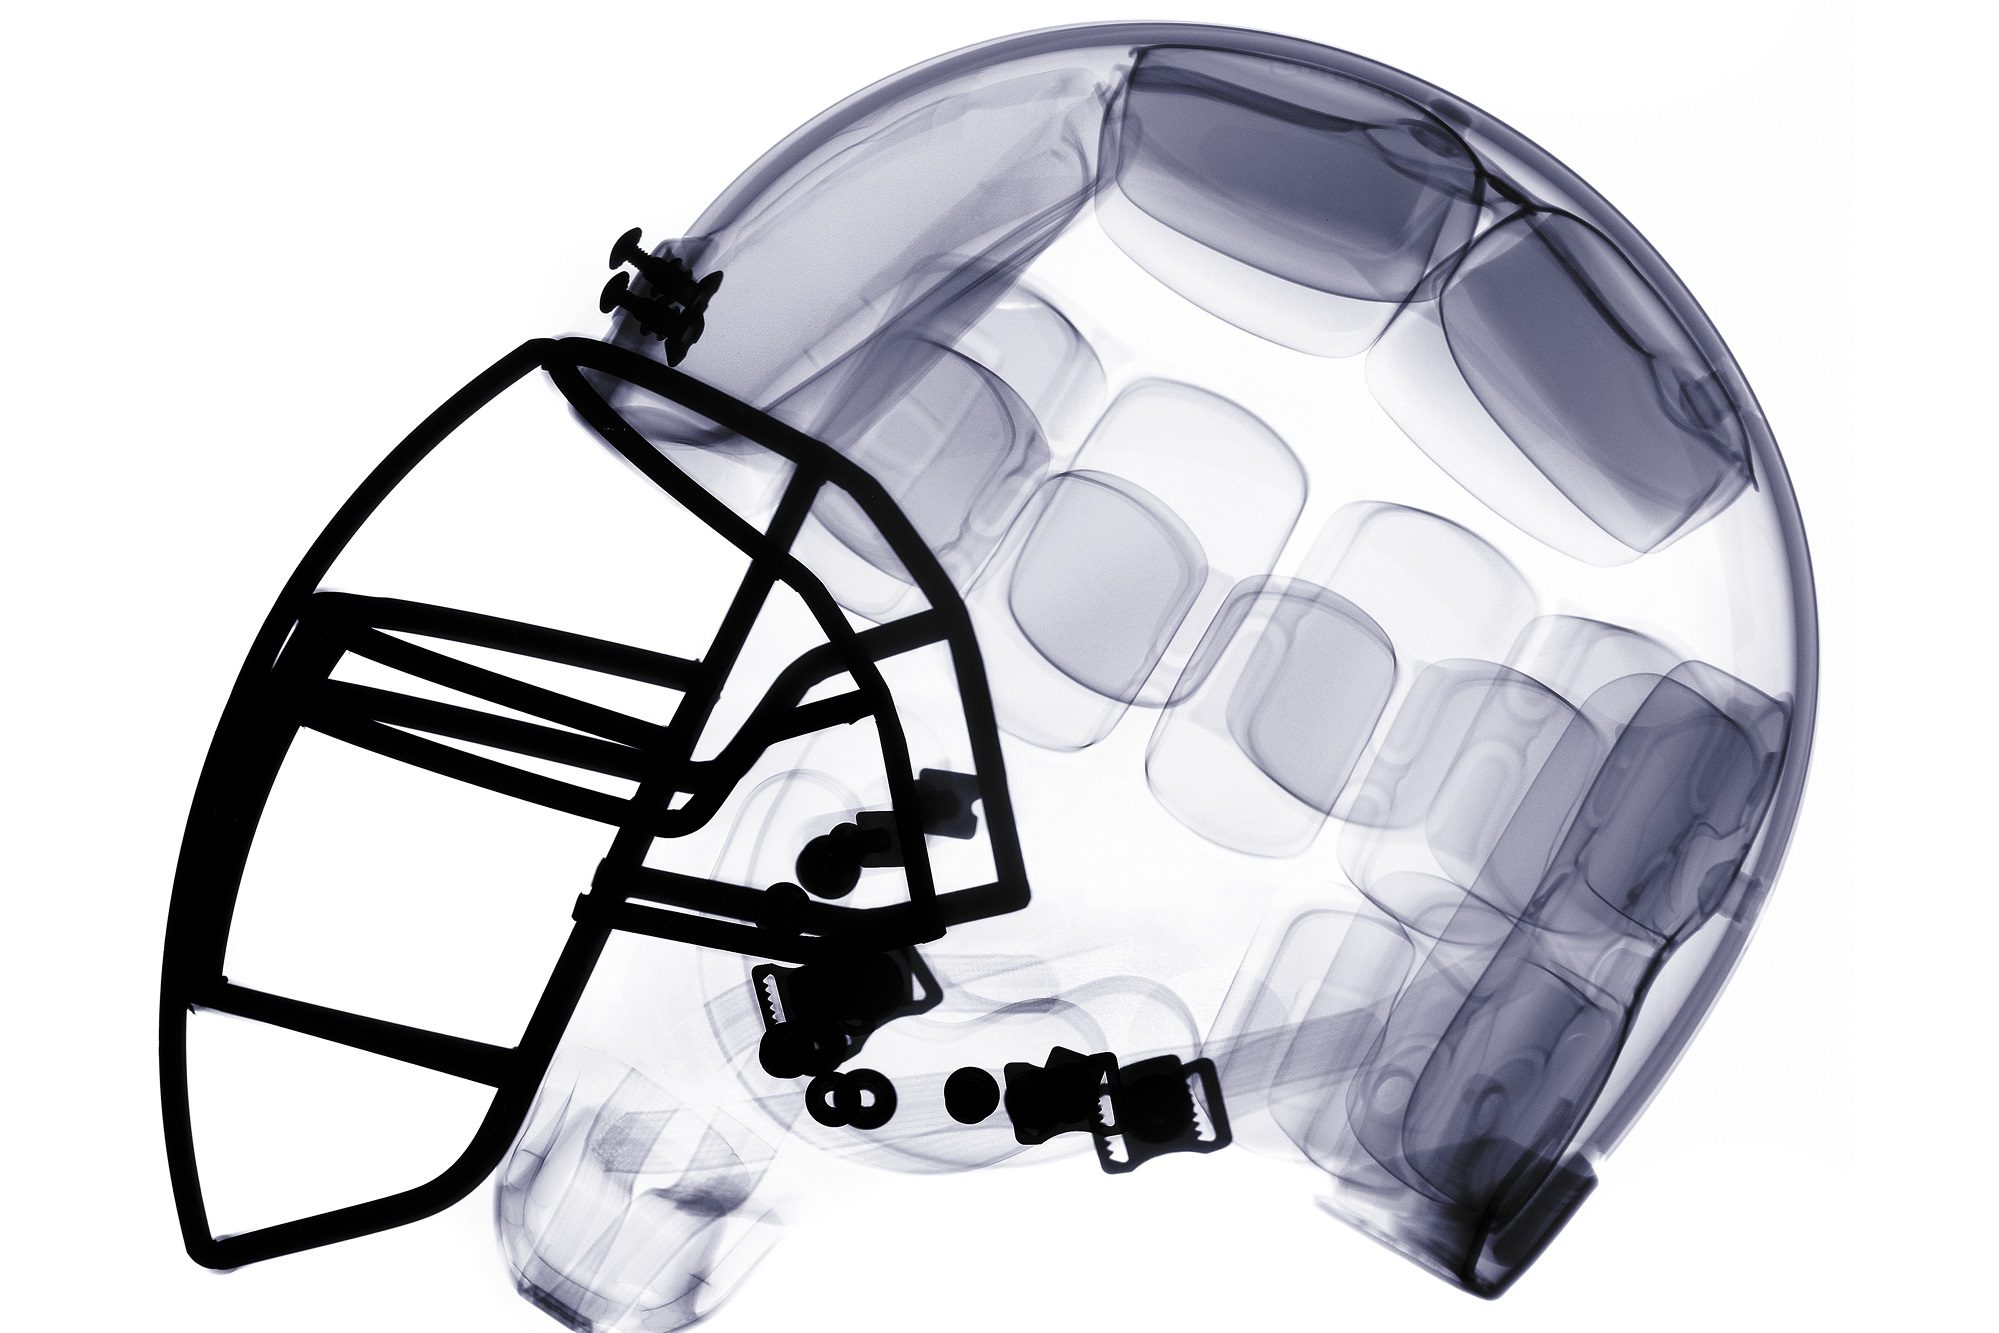 Find out how modern football helmets attempt to limit brain